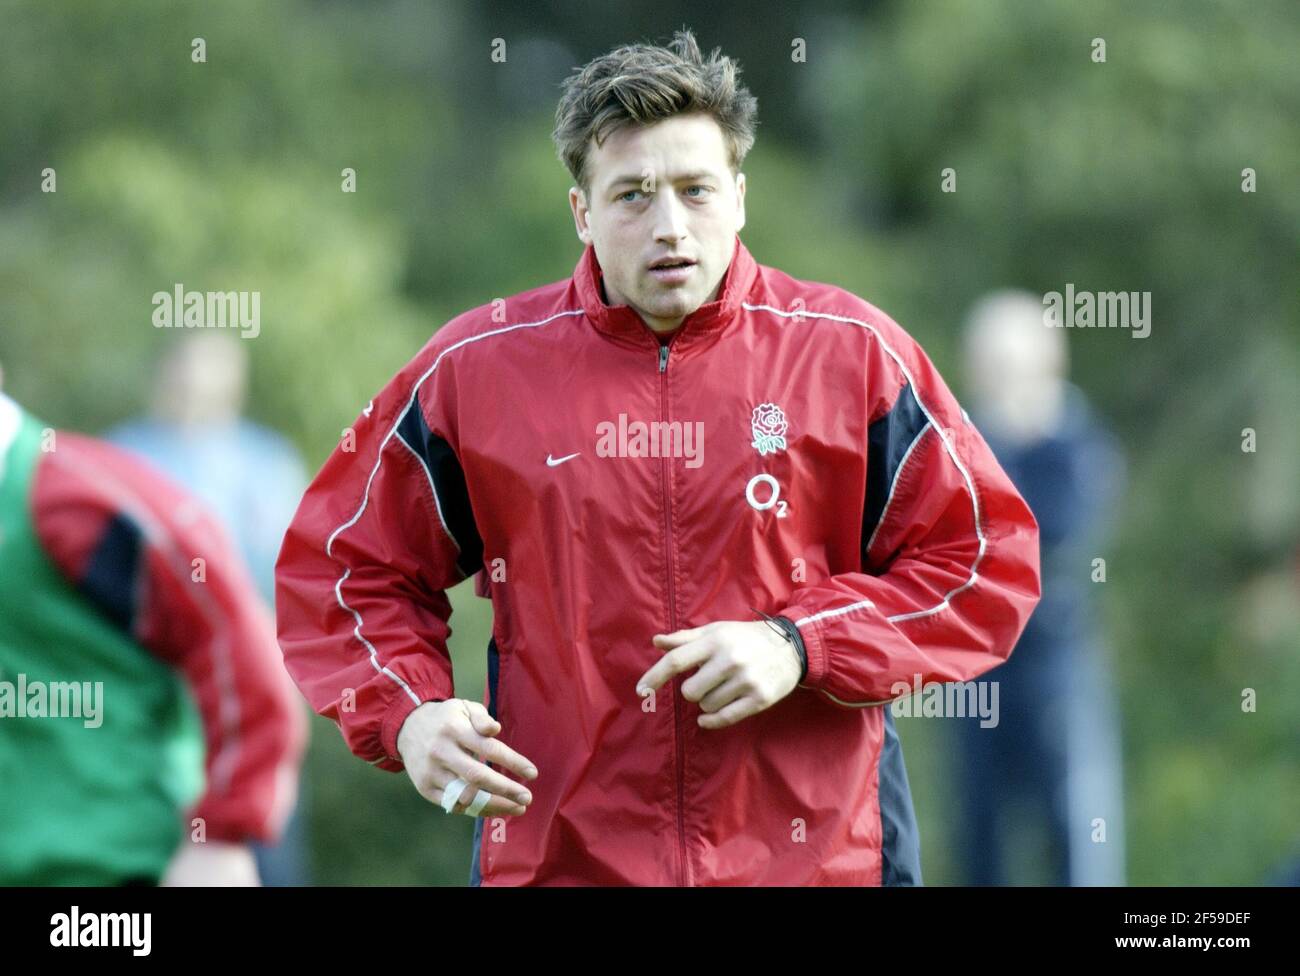 ENGLAND RUGBY TRAINING AT PENNYHILL PARK HOTEL BAGSHOT DAN LUGAR 6/3/2003 PICTURE DAVID ASHDOWNRUGBY Stock Photo